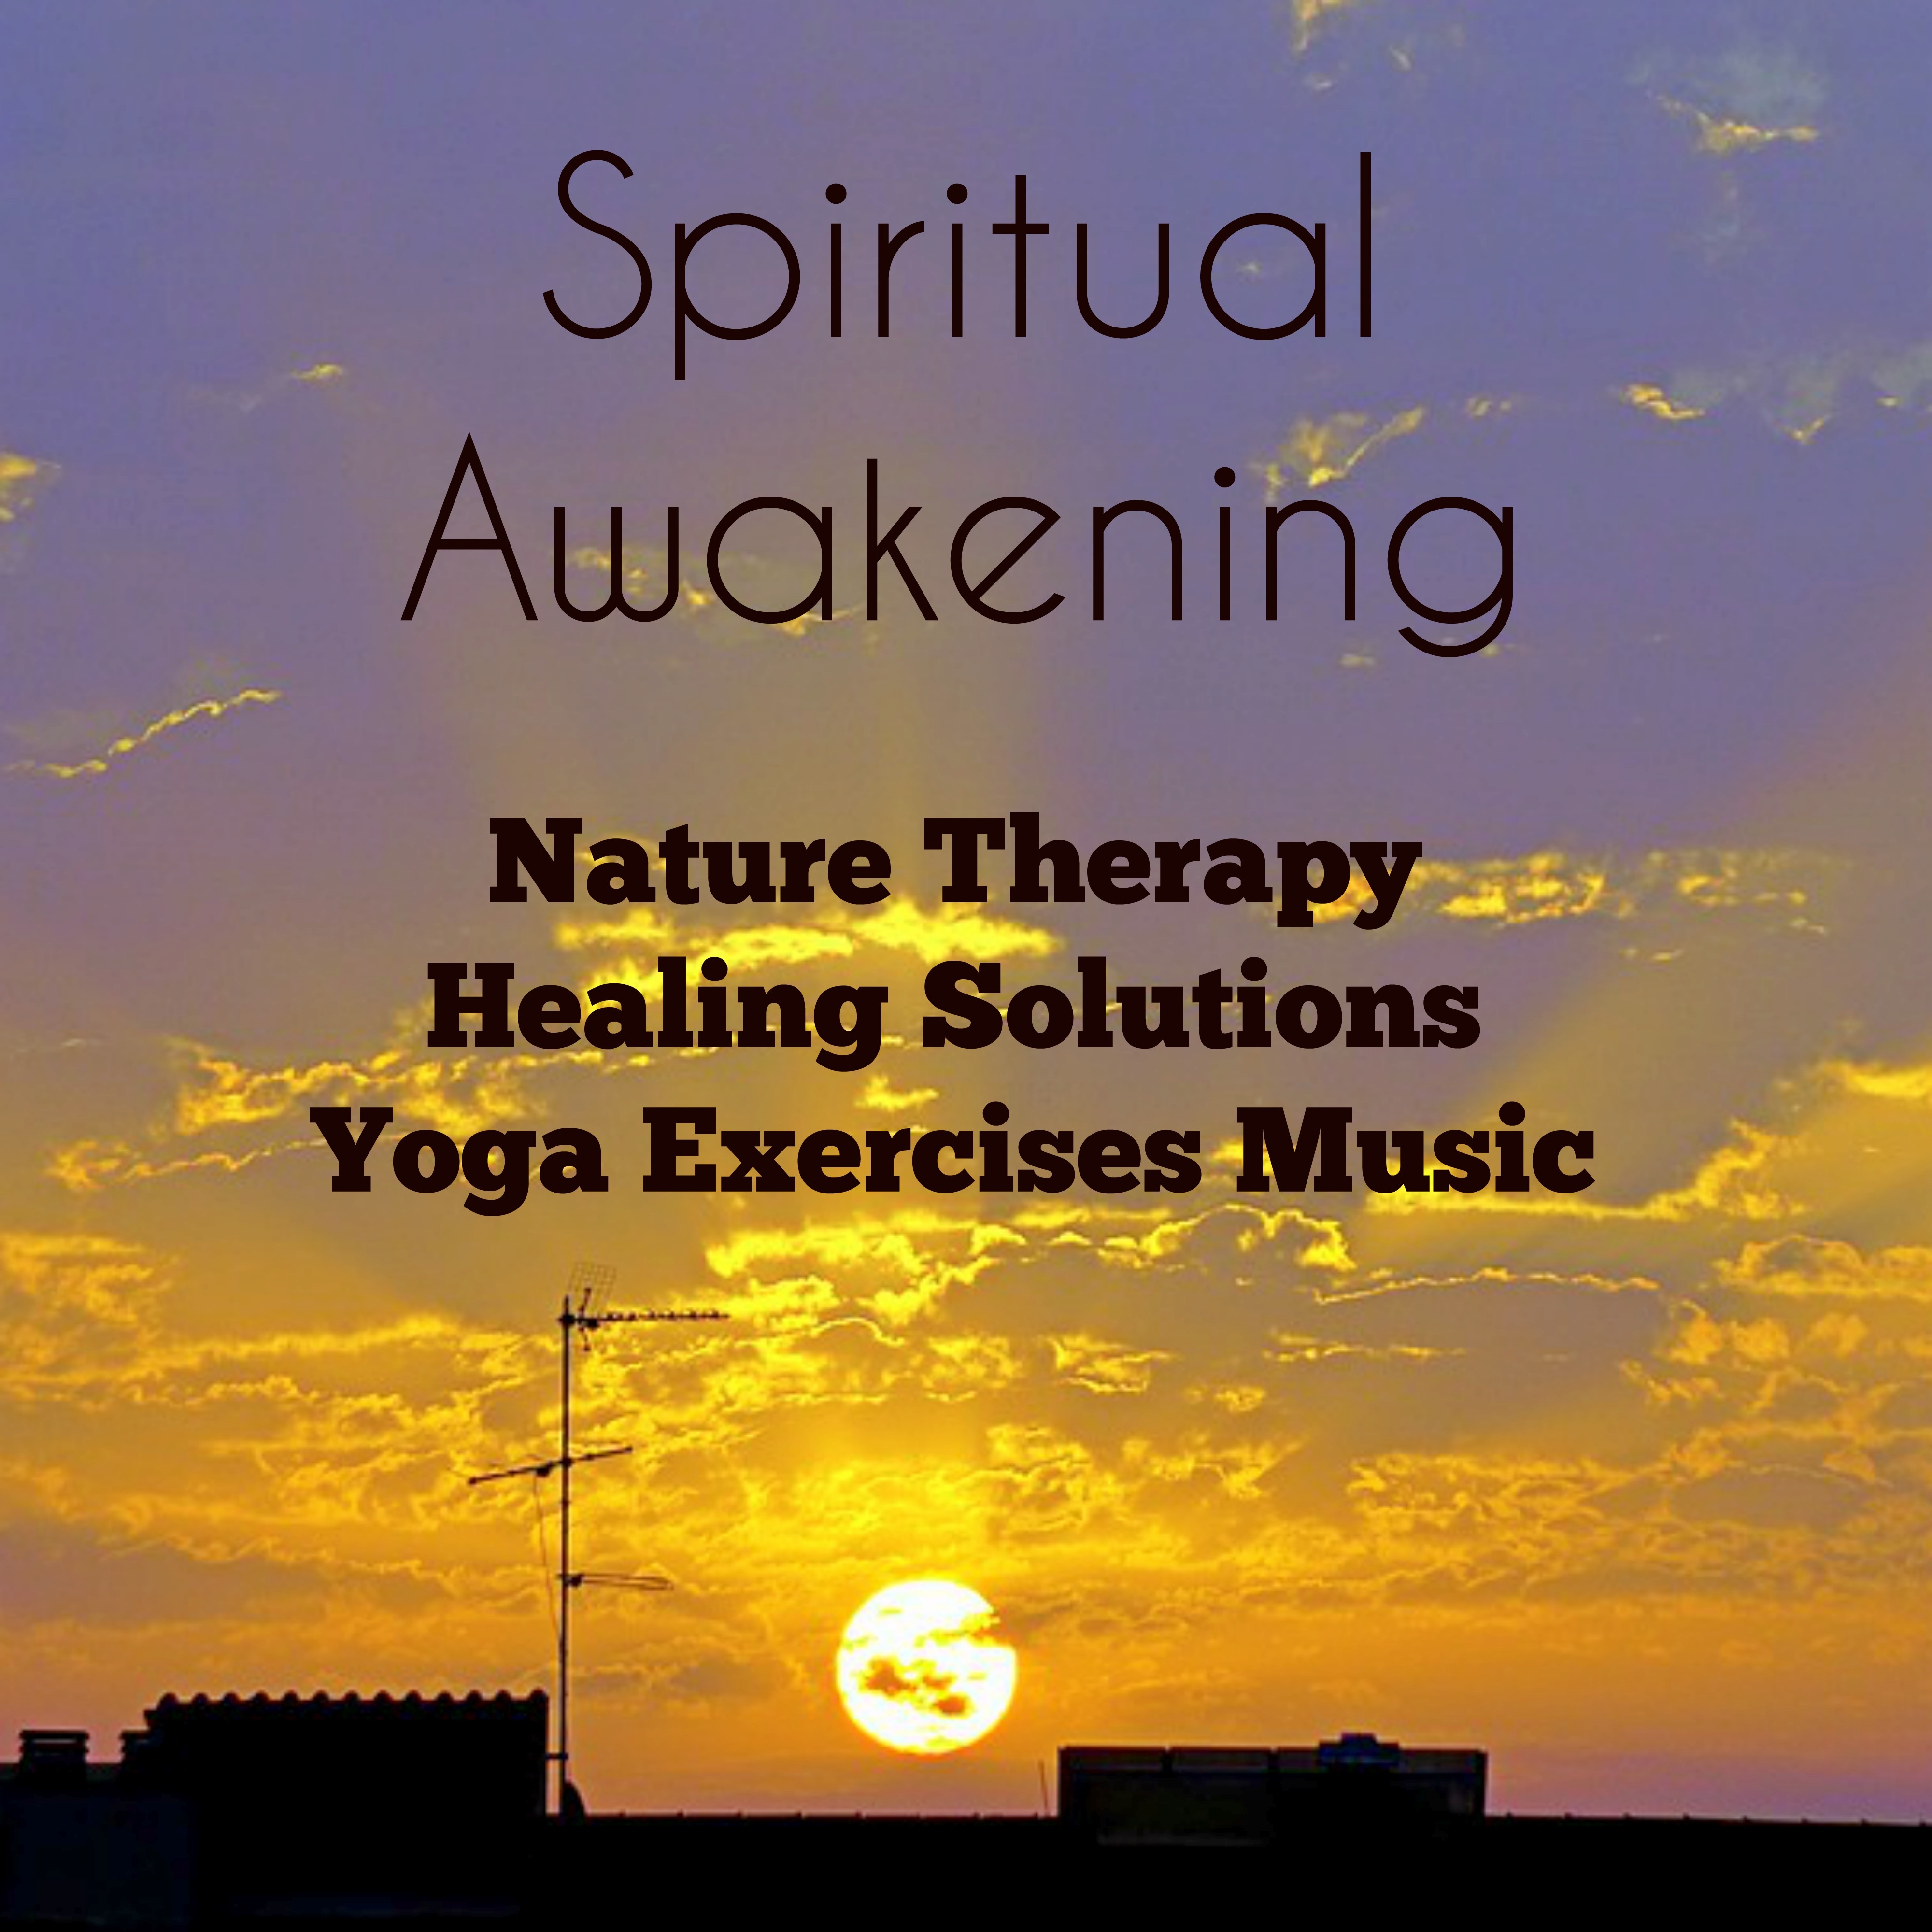 Spiritual Awakening - Nature Therapy Healing Solutions Yoga Exercises Music with Instrumental Wellness Relaxing Sounds